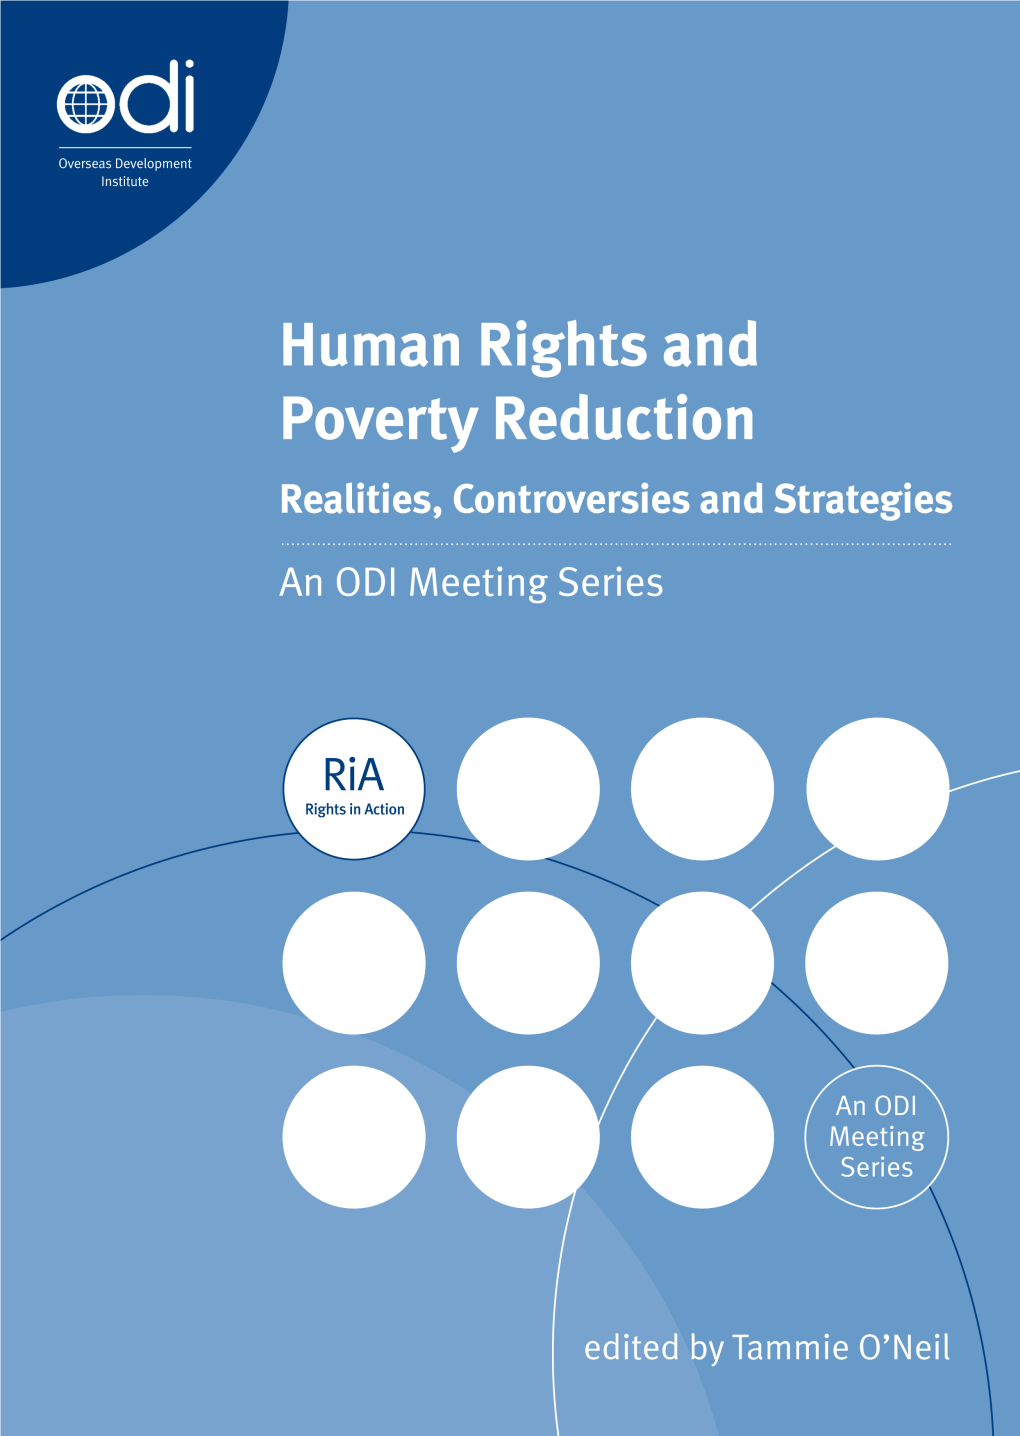 Human Rights and Poverty Reduction: Realities, Controversies and Strategies an ODI Meeting Series